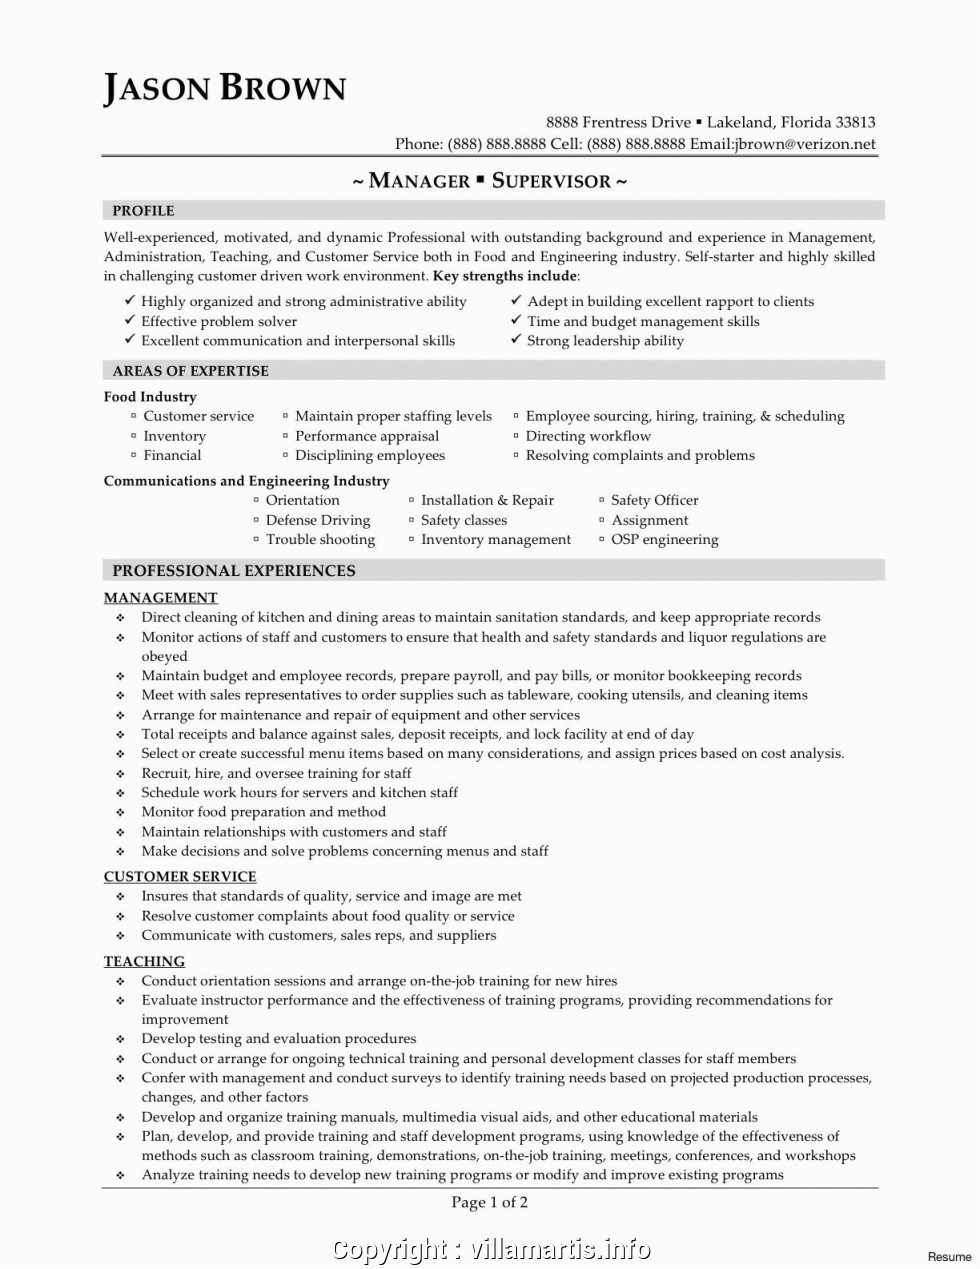 Resume Template for Food Service Industry Example Resume for Food Industry – Resume Writing